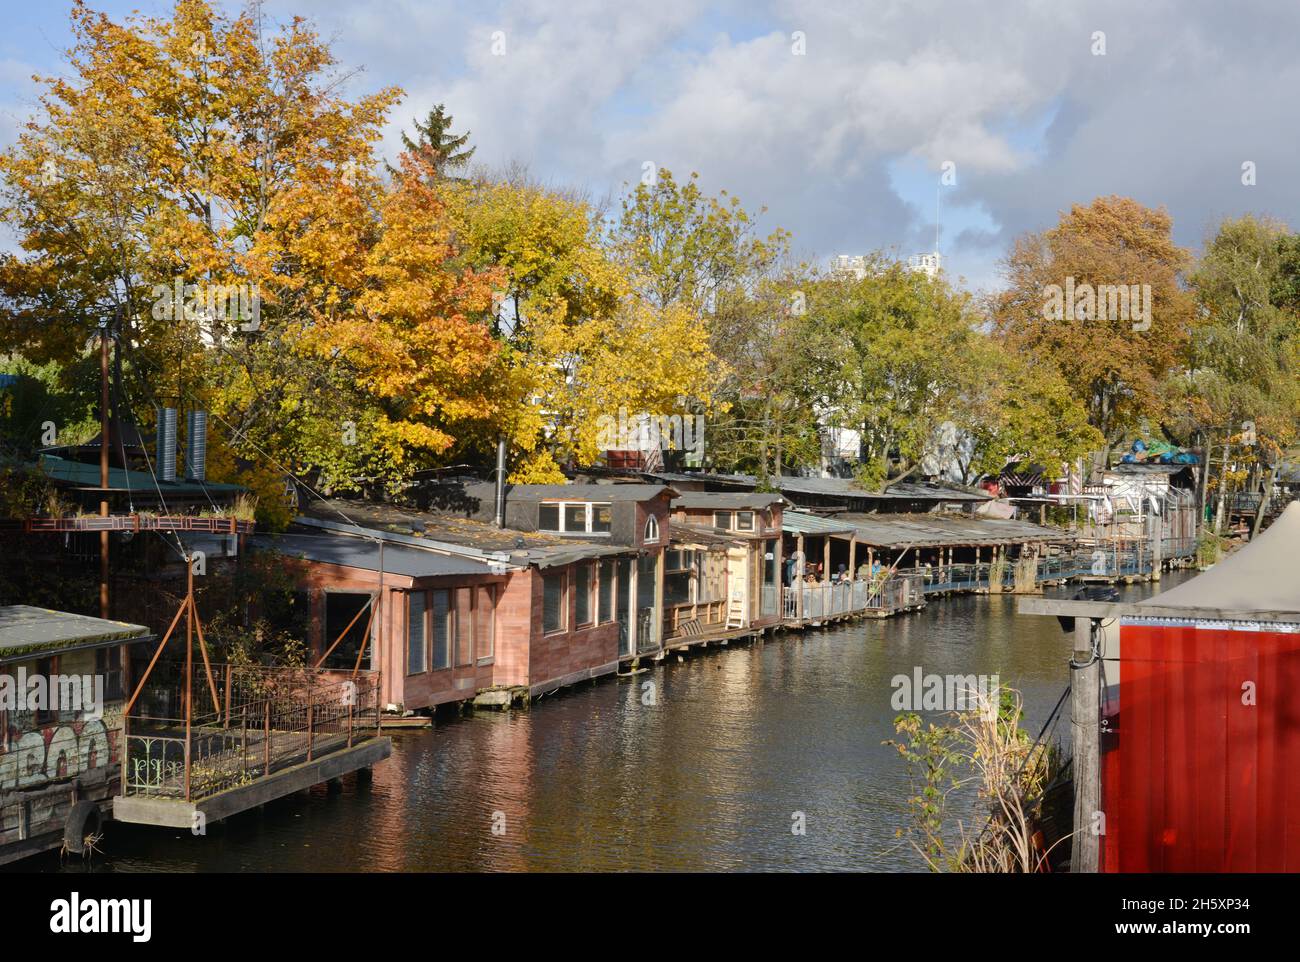 Berlin, Germany 10-23-2021 improvisied shacks and huts on the Flutgraben canal in Kreuzberg Stock Photo